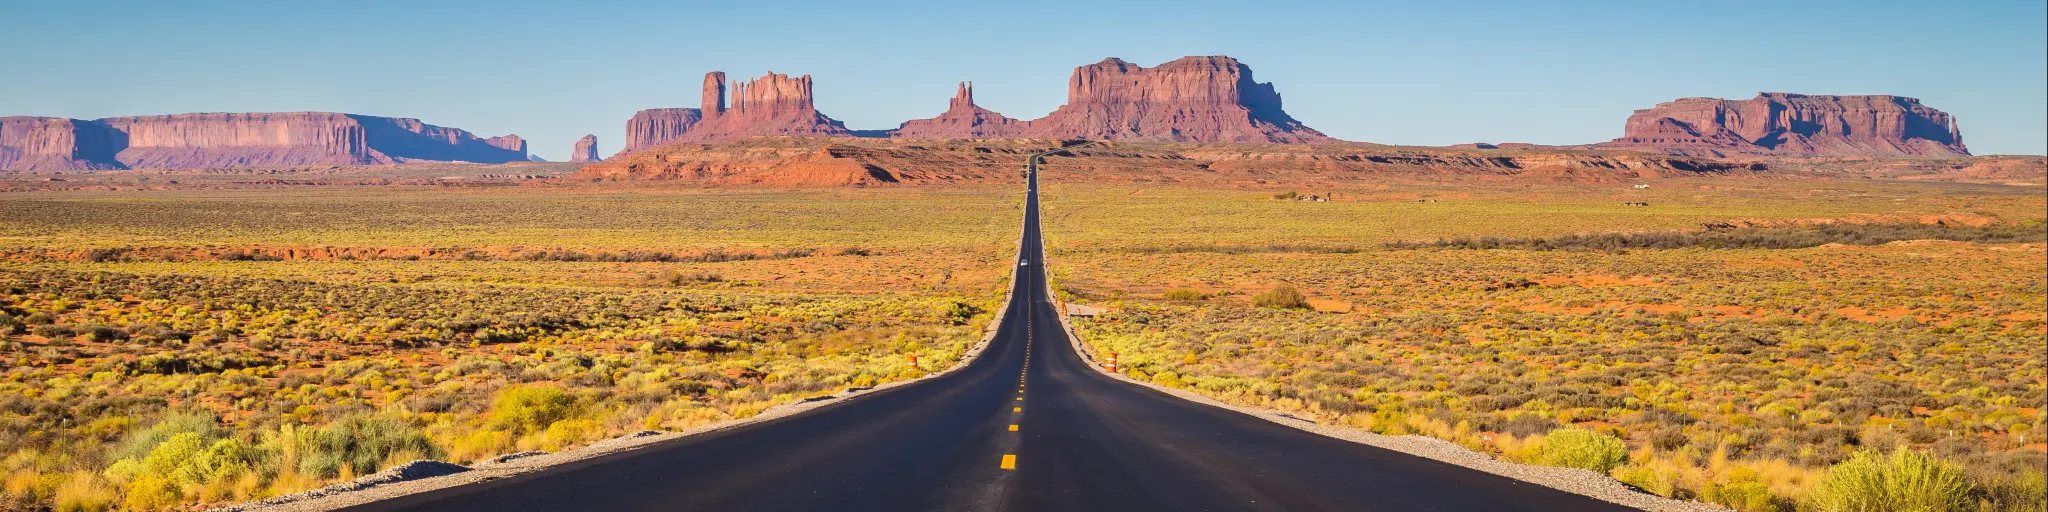 Classic panorama view of historic U.S. Route 163 running through famous Monument Valley